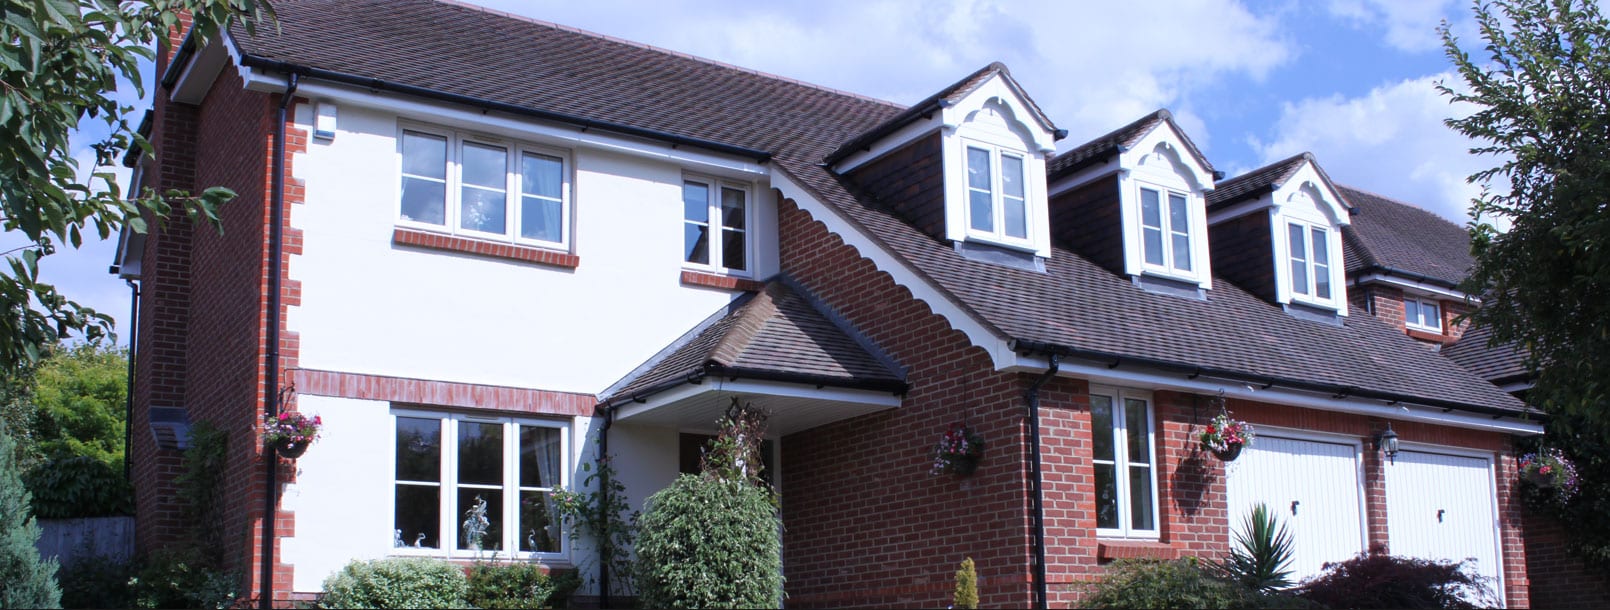 Hertfordshire Roofers and UPVC Fitters | Empire Roofing | UPVC large roofed home hero